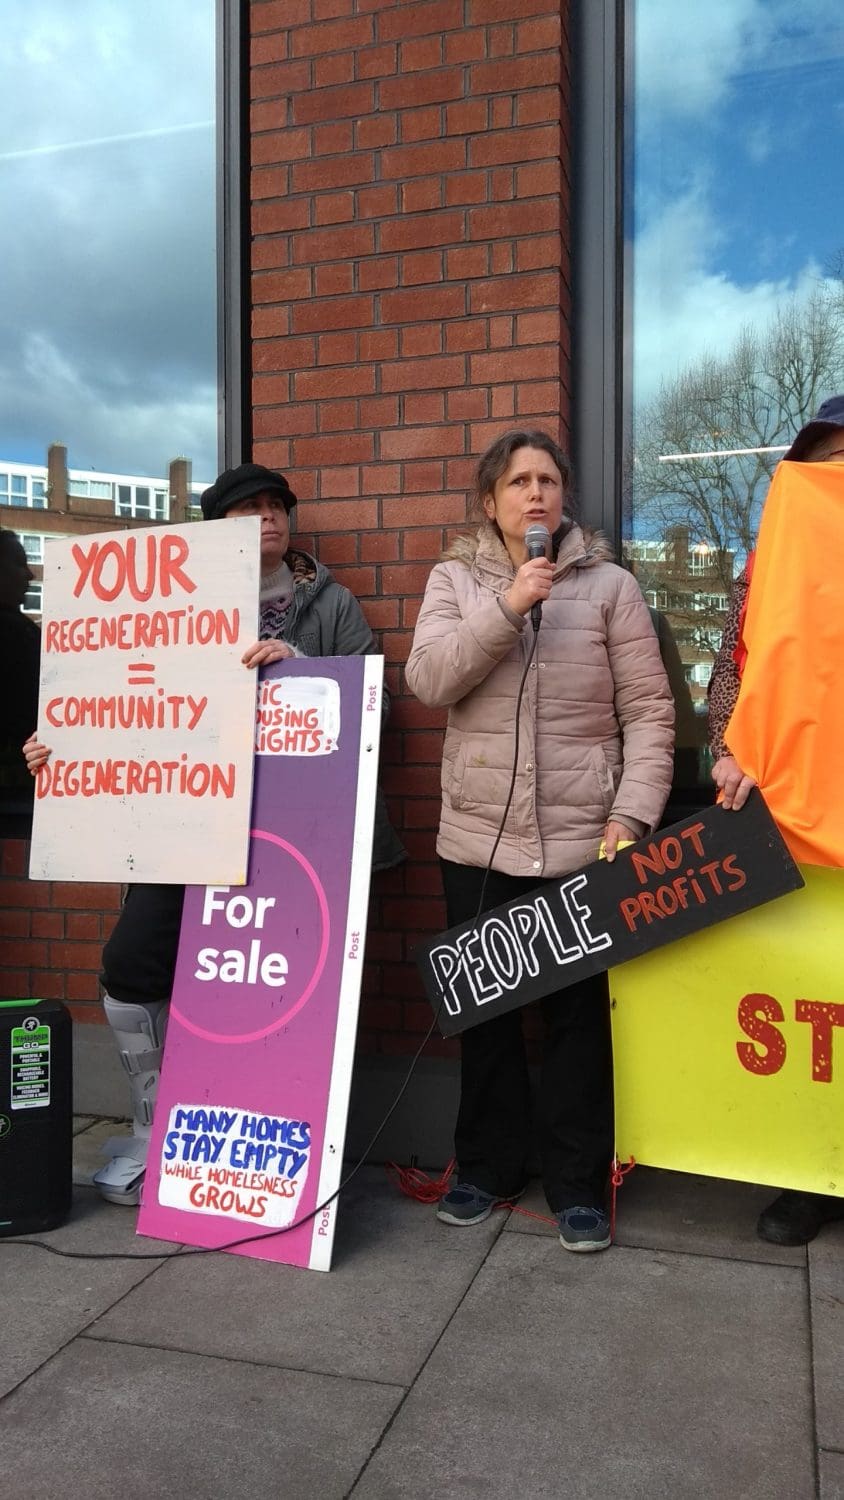 A woman speaking at a housing protest